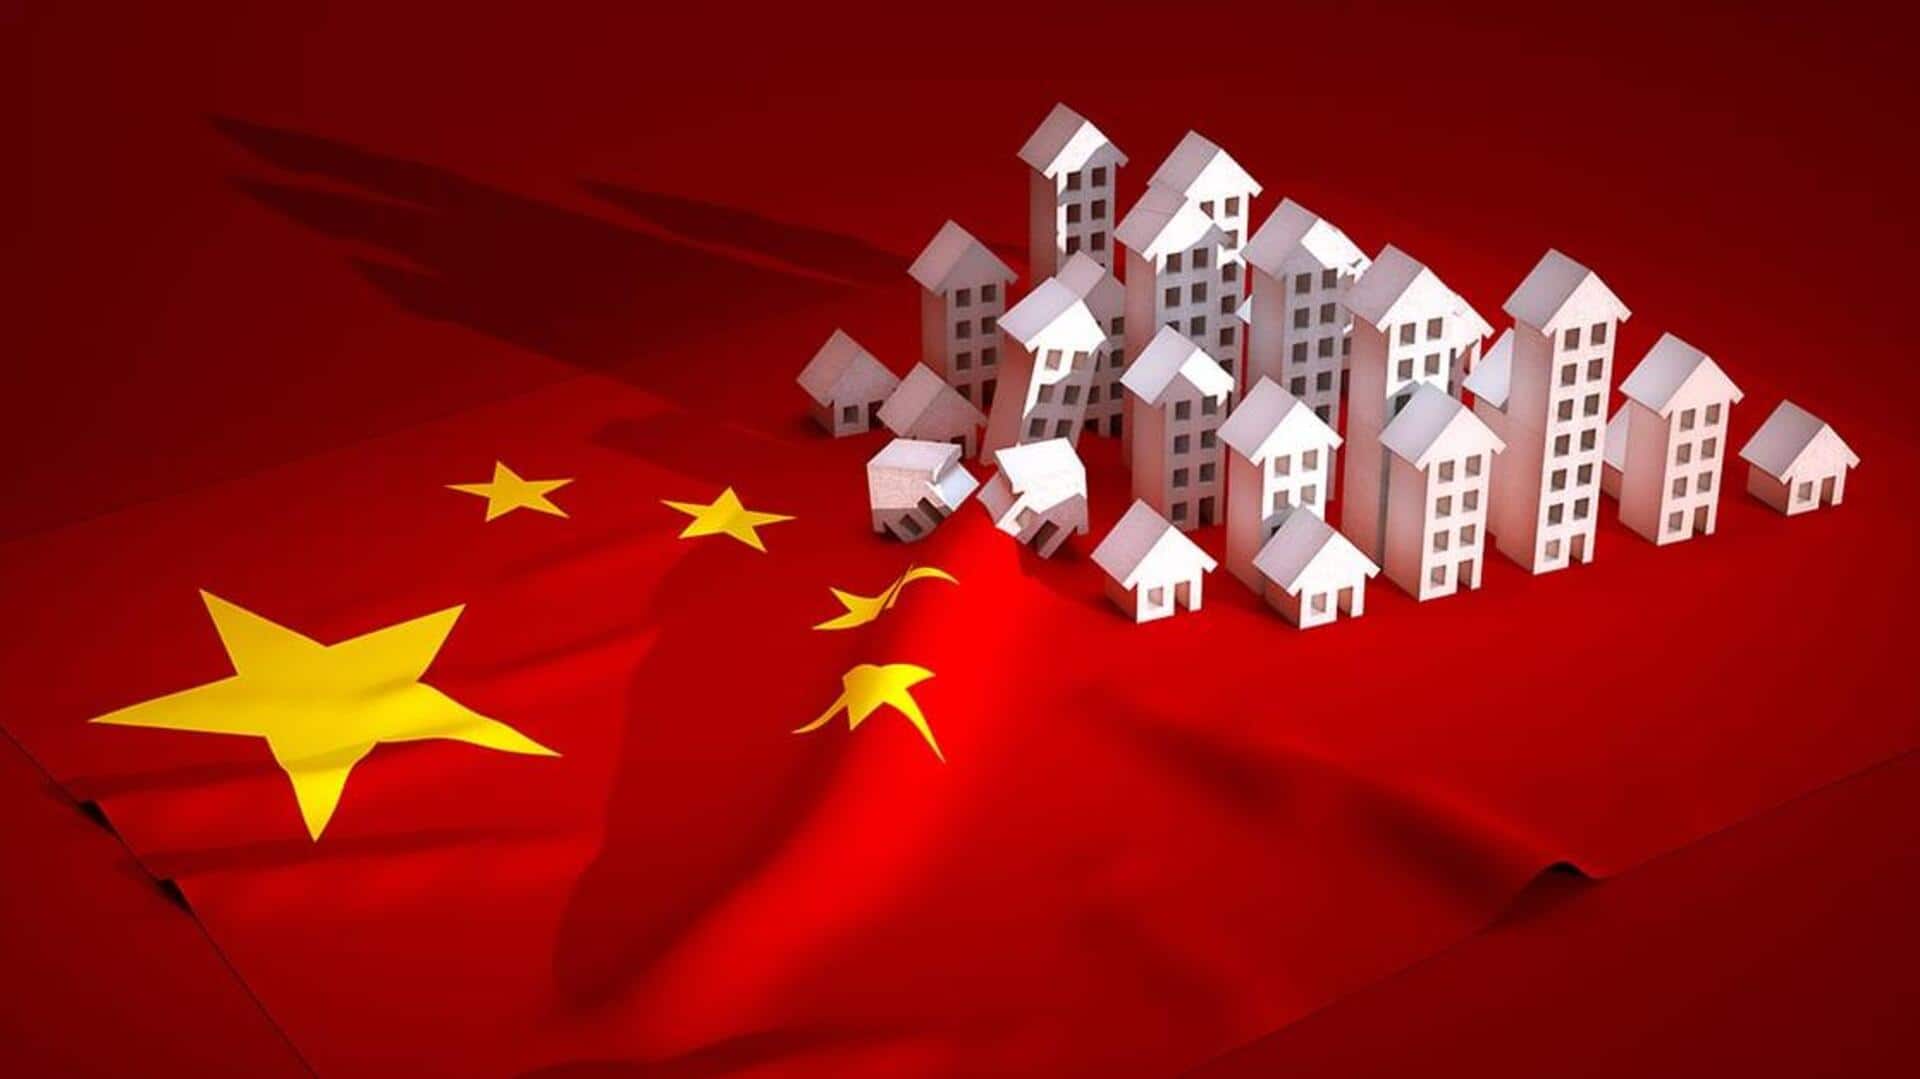 China's housing minister says troubled property developers must go bankrupt